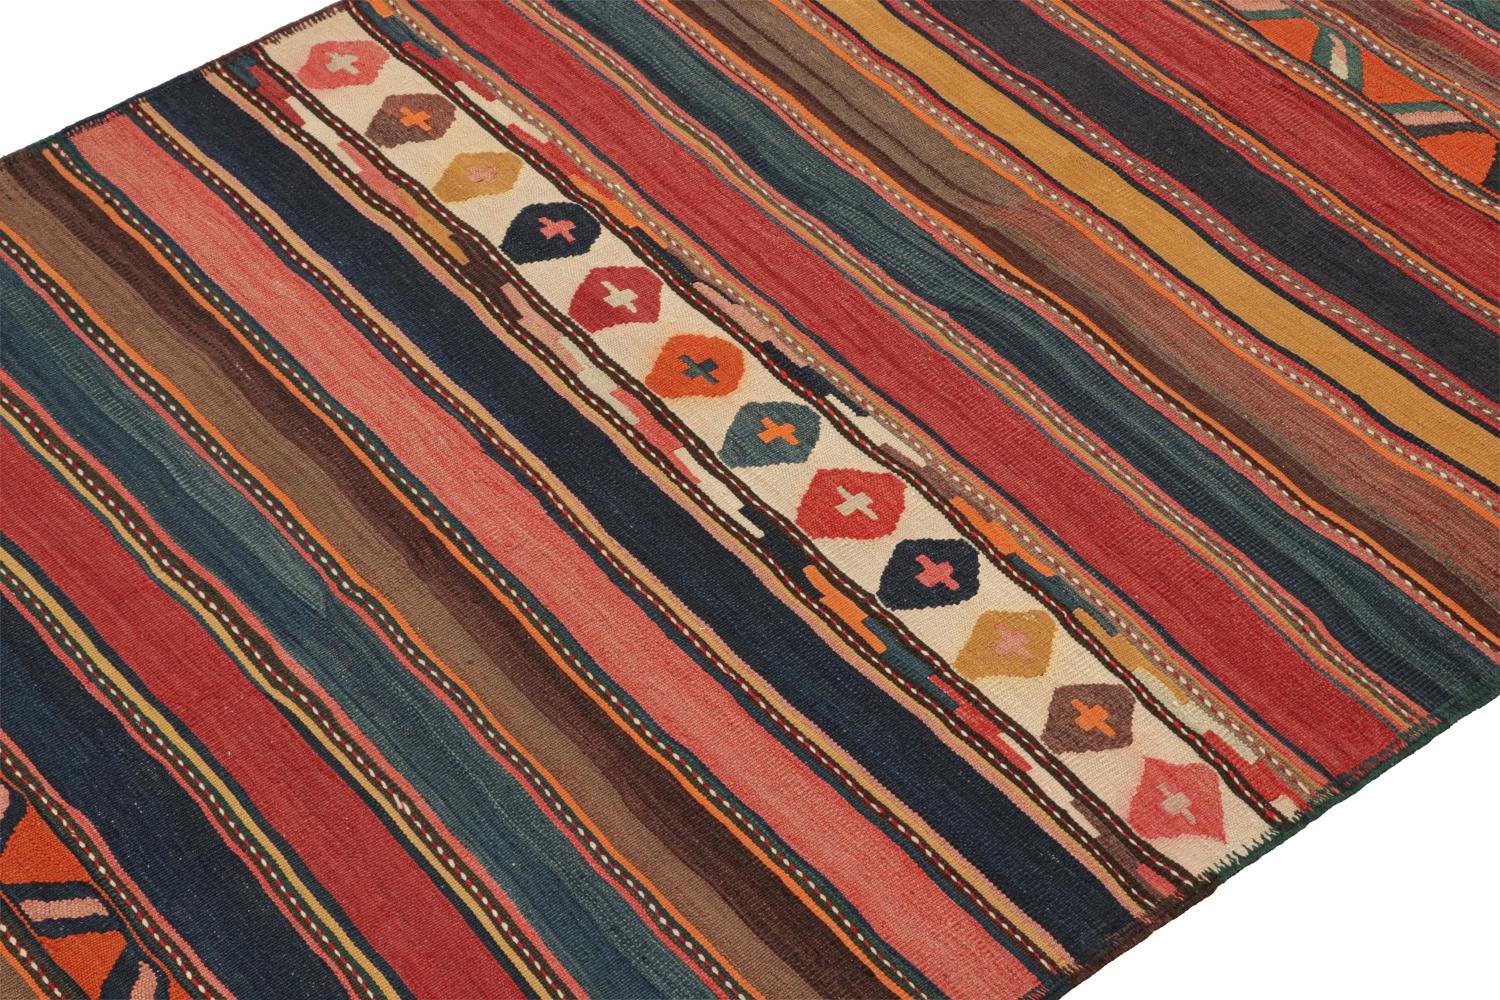 This vintage 5x9 Persian Kilim is a midcentury tribal rug that we believe originates from the Shahsavan tribe. 

On the Design:

Handwoven in wool circa 1950-1960, its design enjoys a colorful play of stripes and geometric patterns. Keen eyes